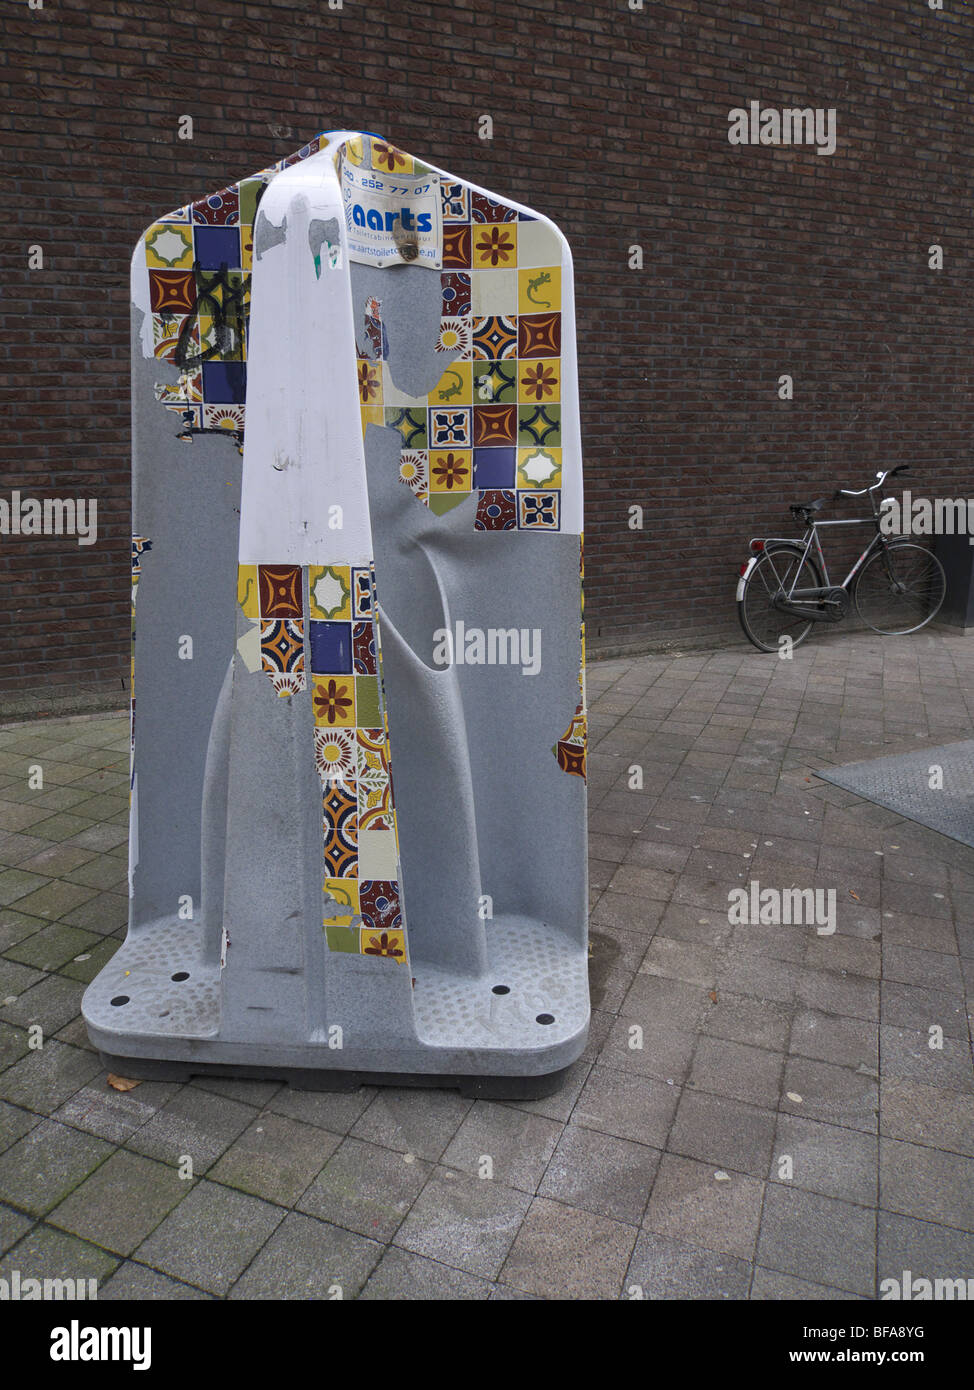 A public urinal in Eindhoven, the Netherlands. Stock Photo